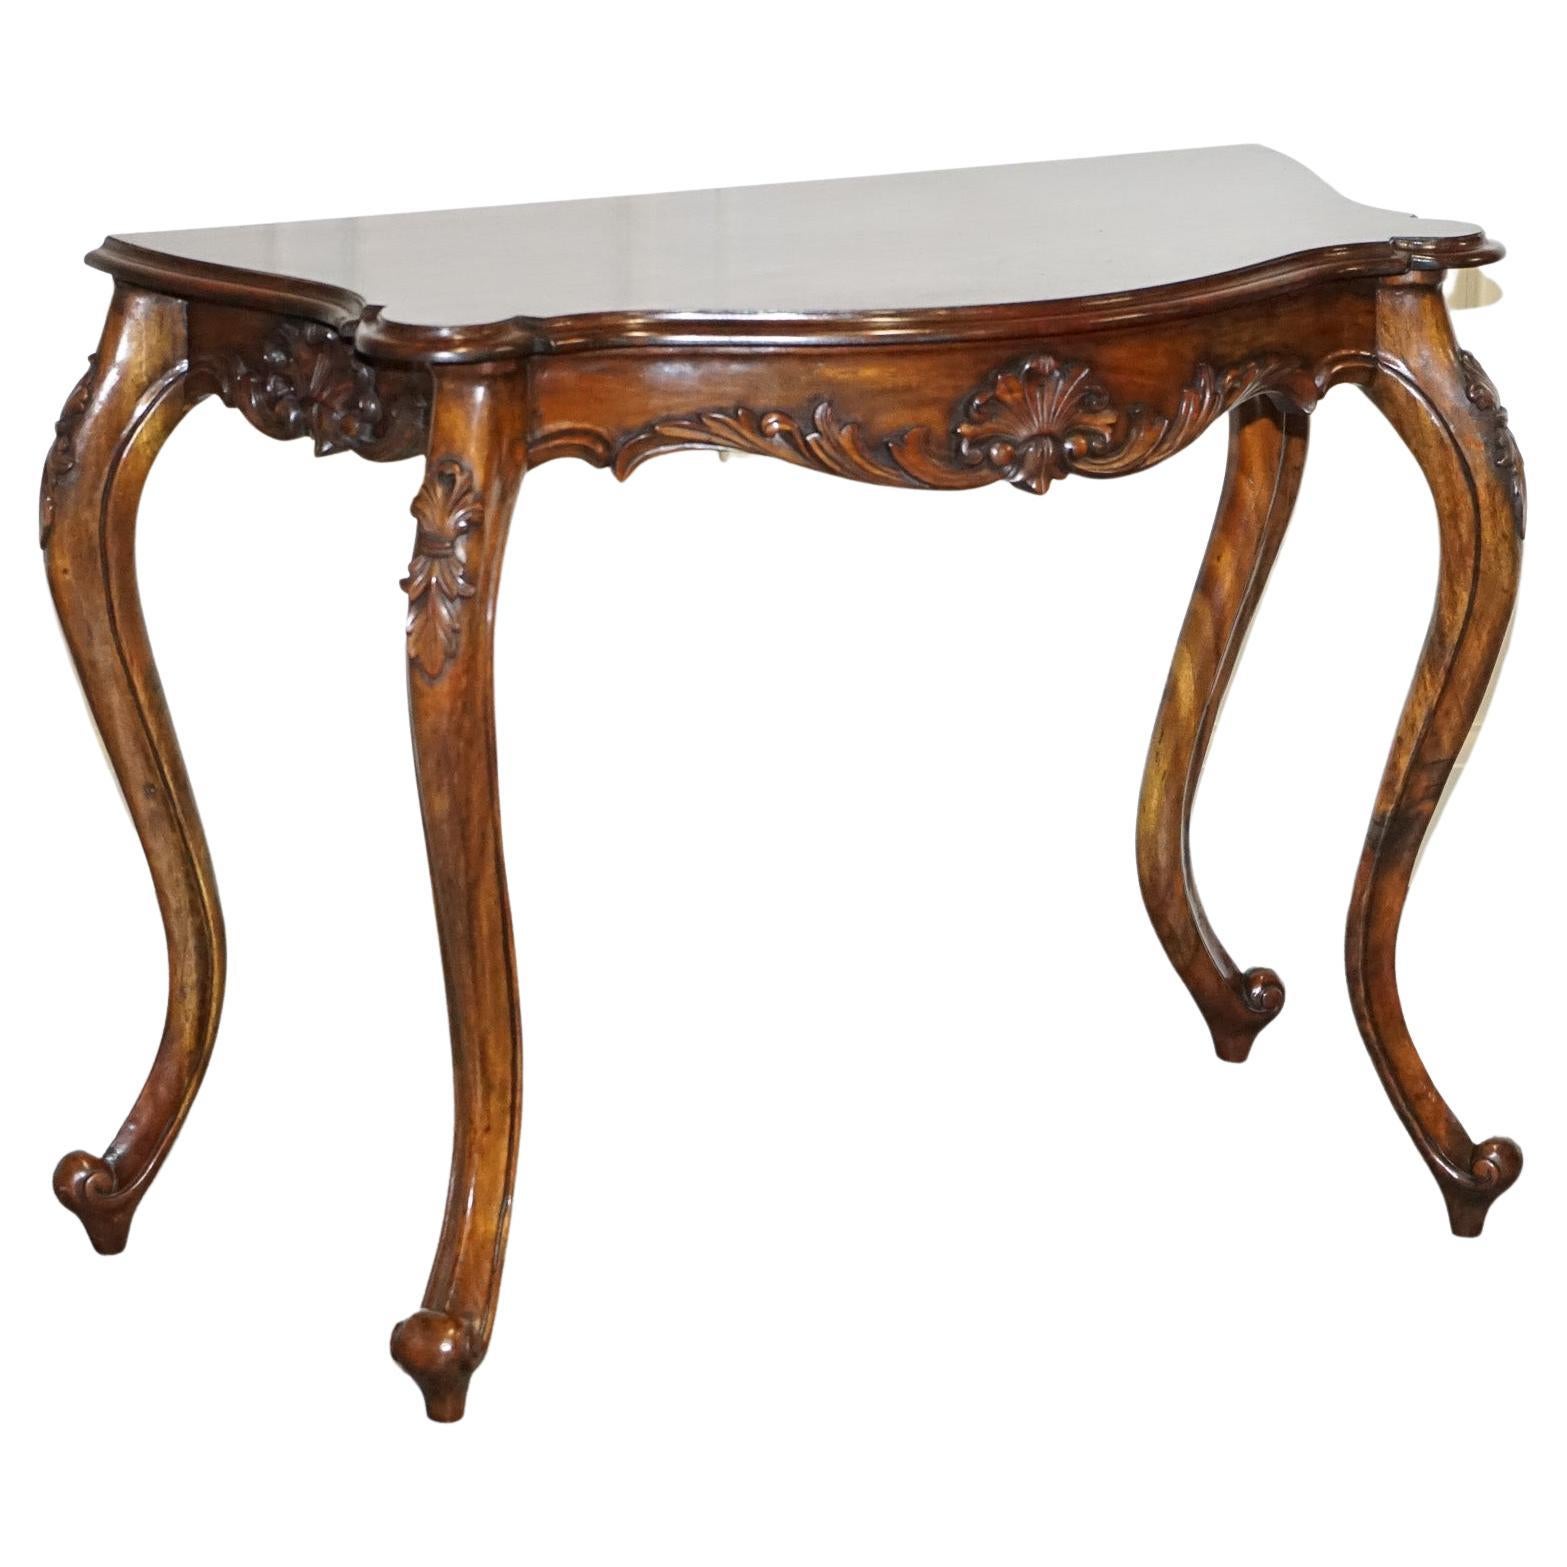 Late 19th Century Carved French Hall Stand Console Table with Cabriole Legs For Sale